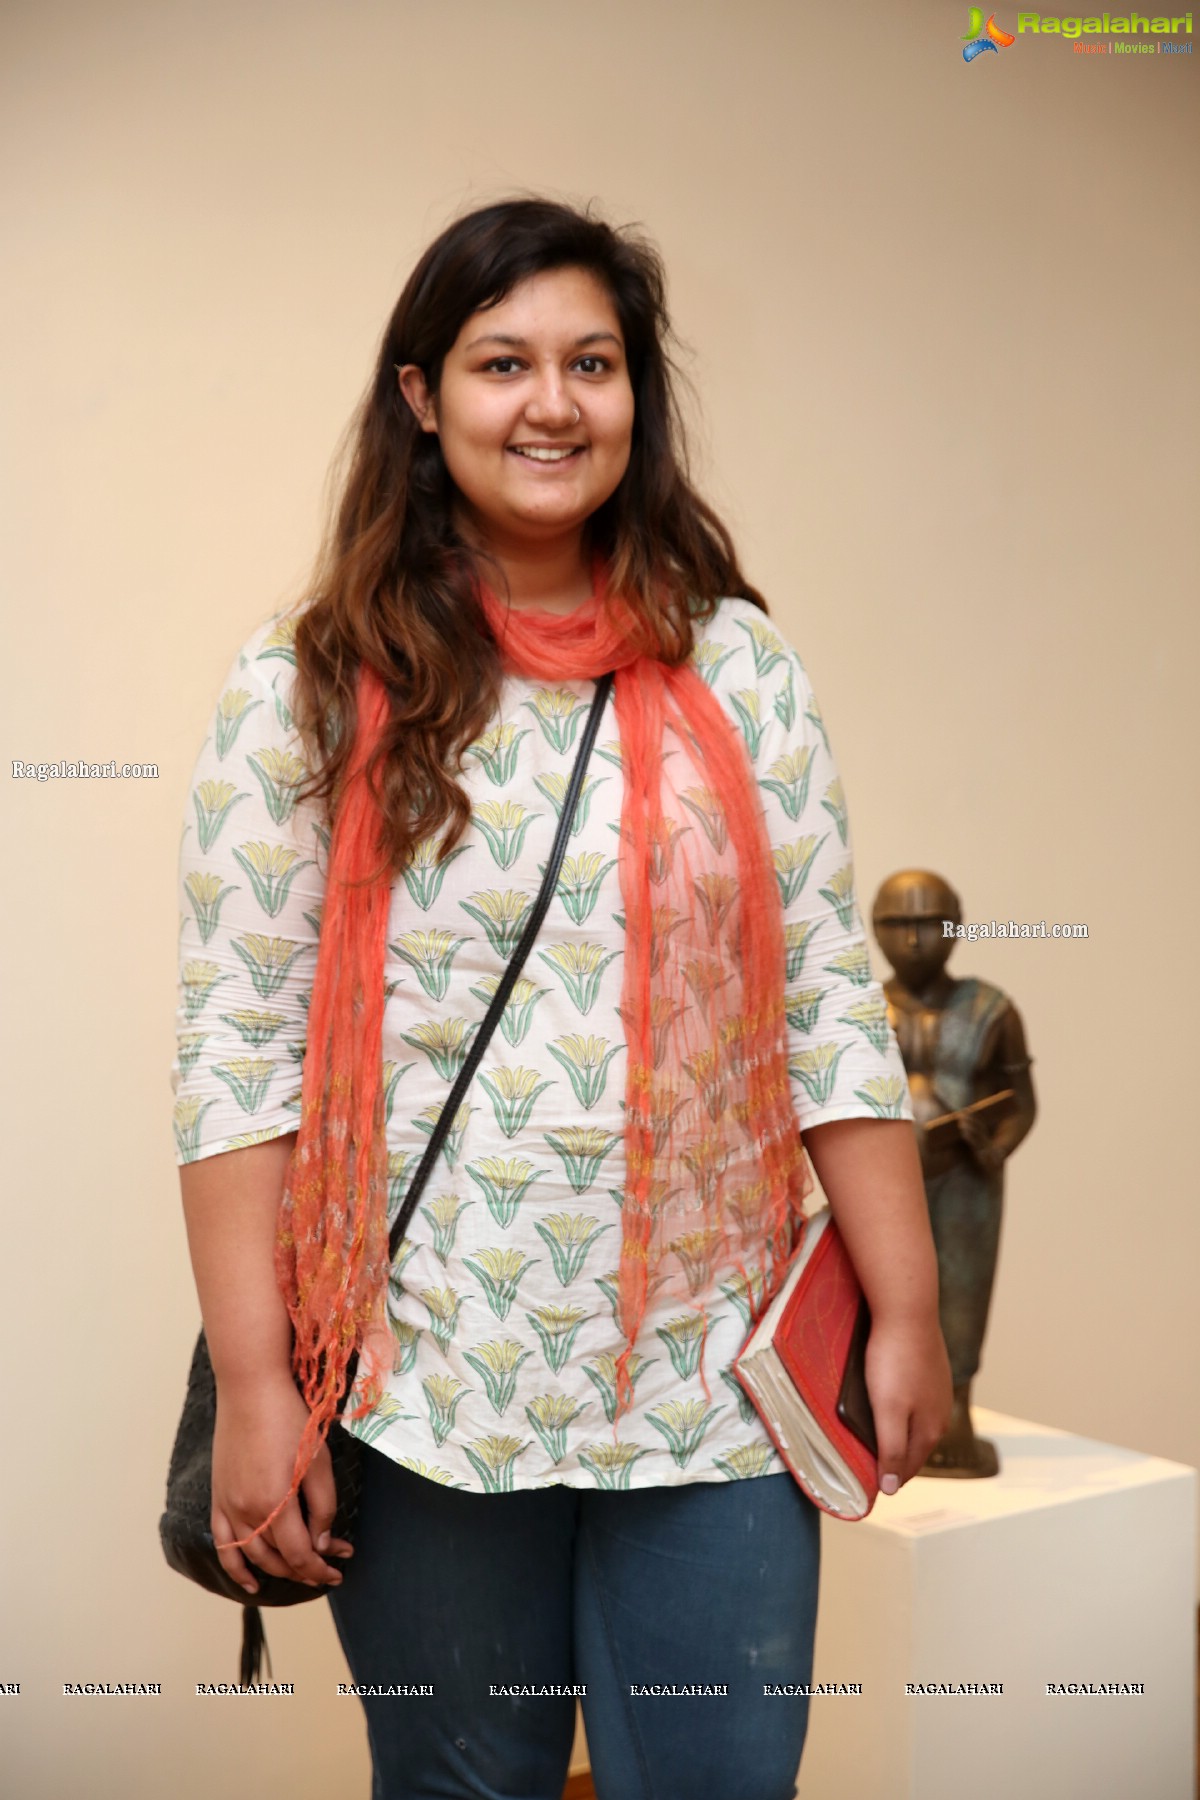 Kalakriti Art Gallery Presents 'Bronzed - From Paint to Patina'